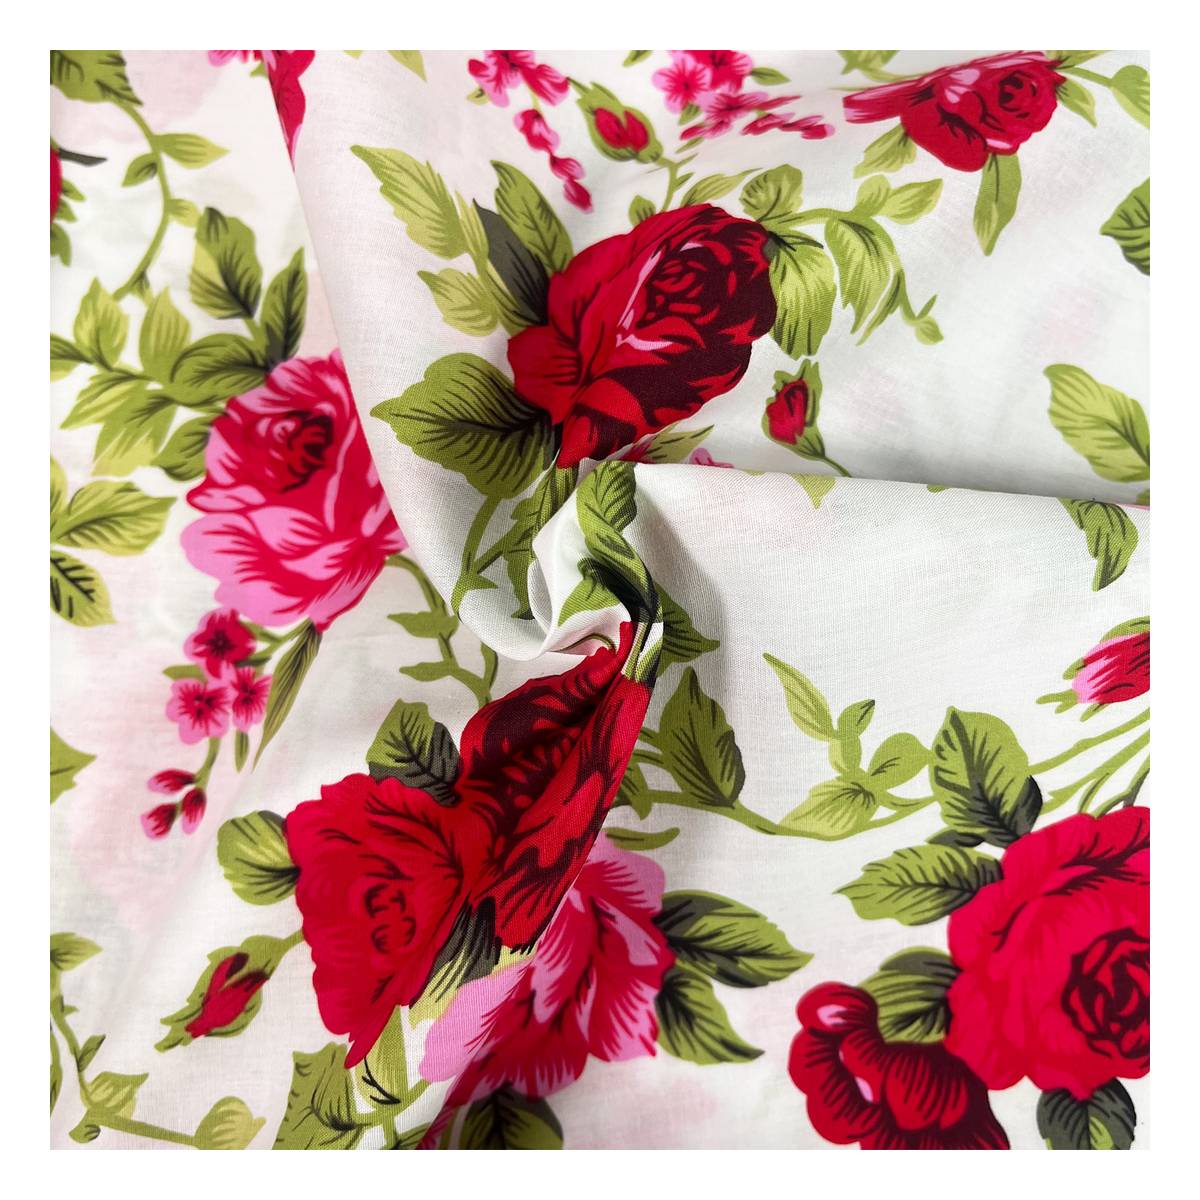 100% Cotton Fabric Red Rose on White Floral Print Craft Fabric Material 